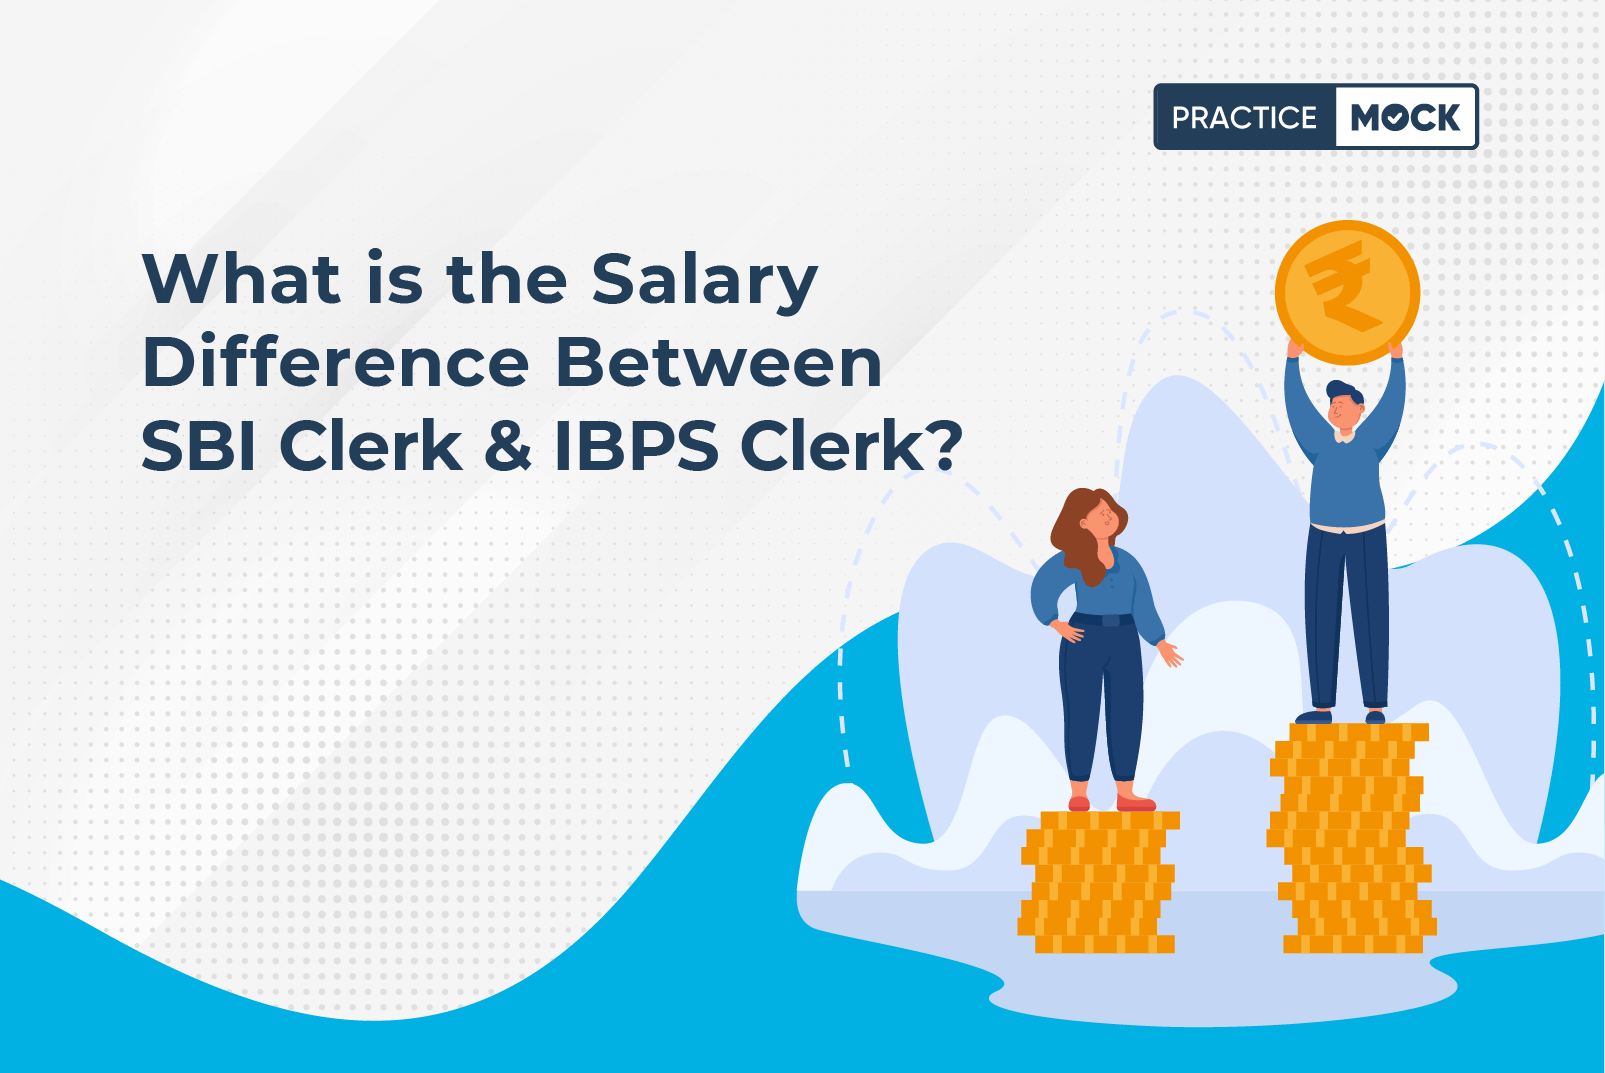 What is the Salary Difference between SBI Clerk & IBPS Clerk (2)